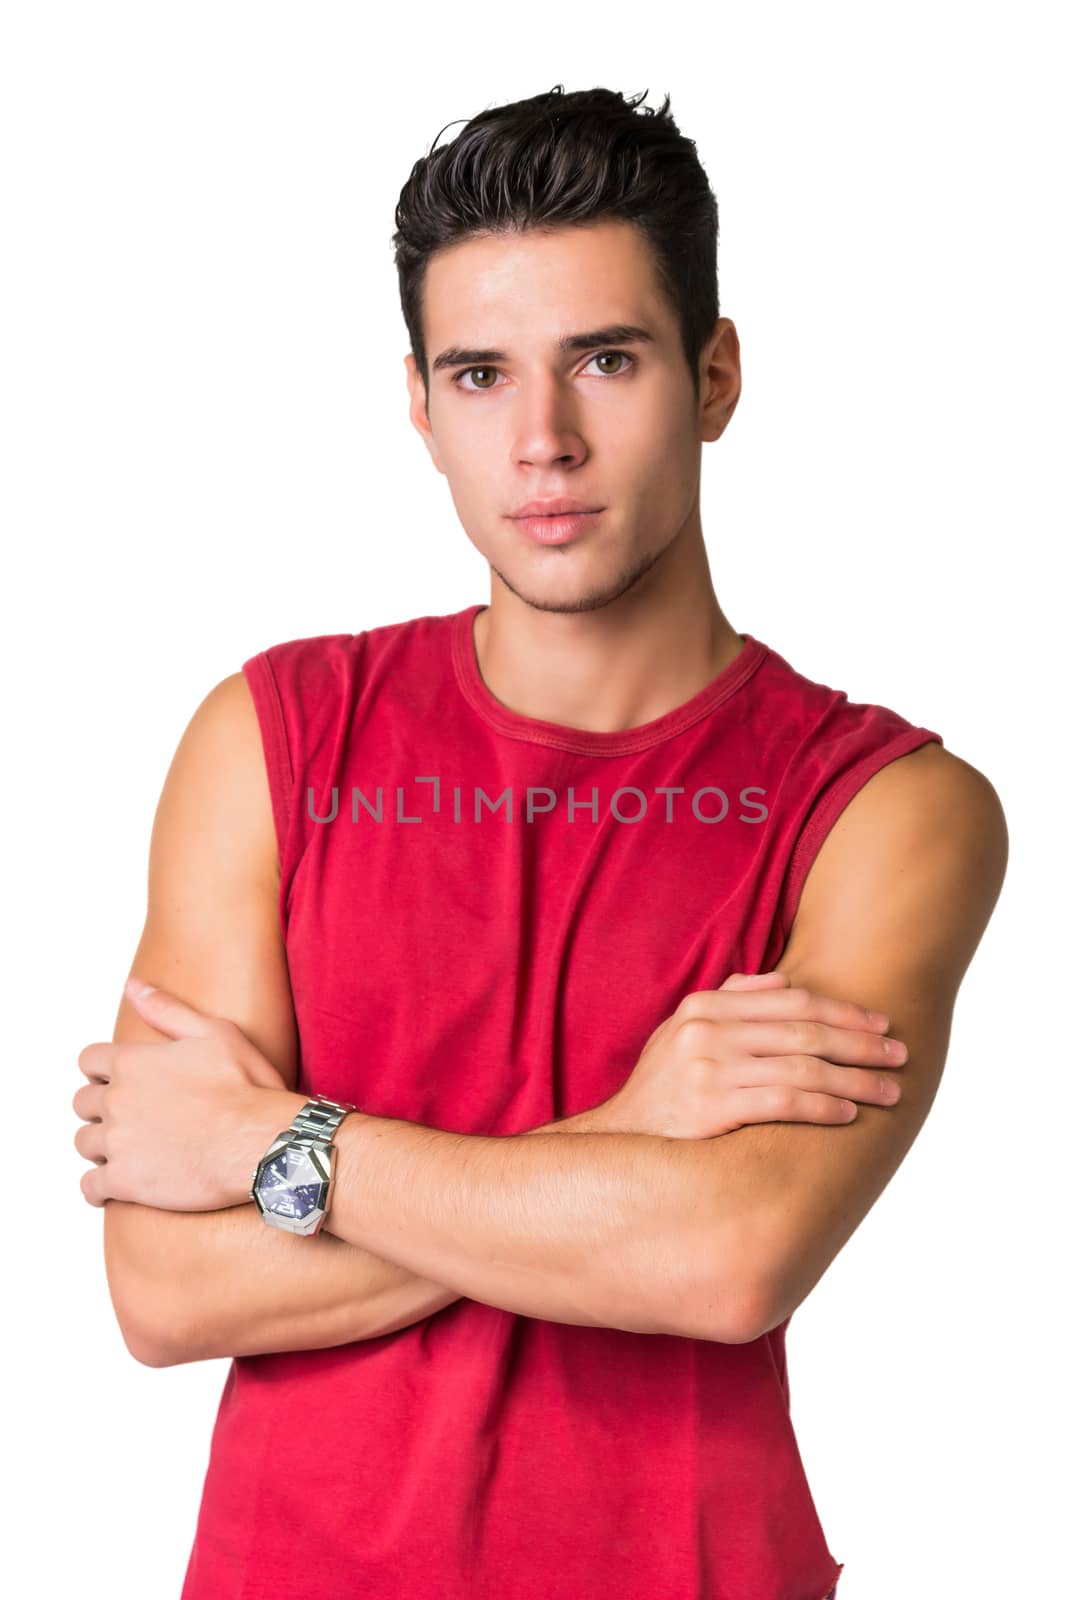 Serious looking young man wearing red t-shirt looking at camera isolated in white background